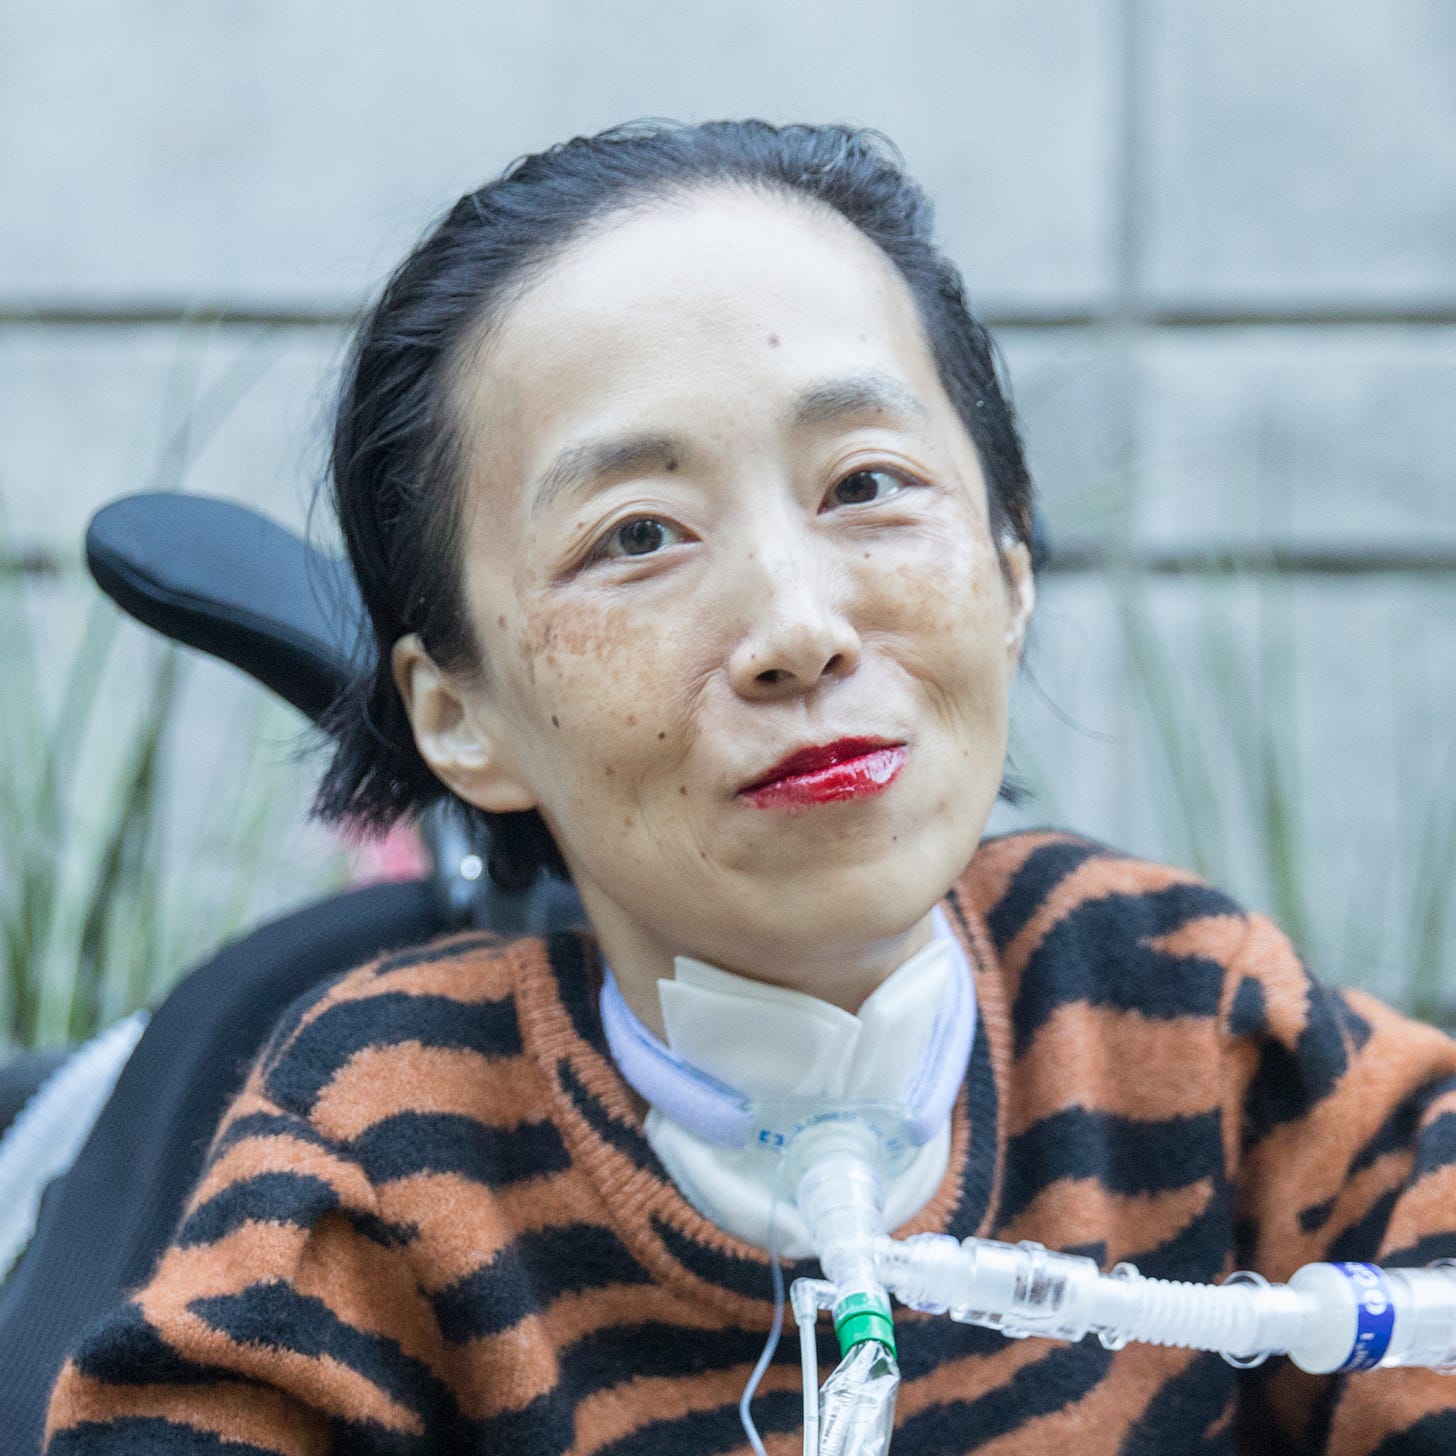 Photo of Alice Wong, an Asian American disabled woman in a power chair. She is wearing an orange and black tiger-striped sweater, black pants, a bold red lip color and a trach at her neck. In the background is a gray cement wall with greenery. Photo credit: Eddie Hernandez Photography.